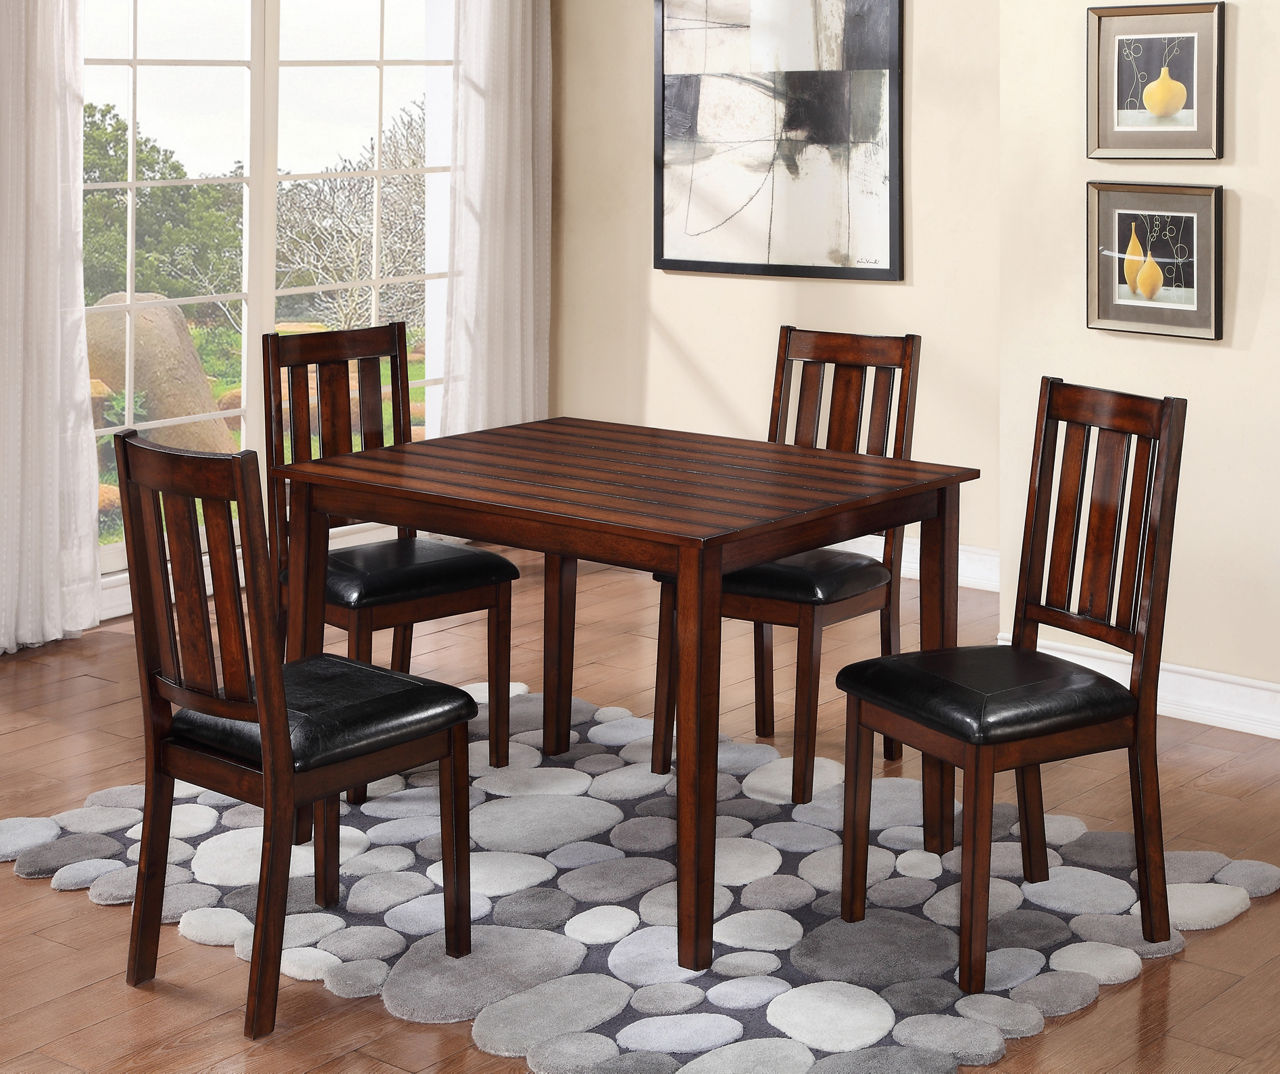 5 Piece Planked Dining Set Big Lots